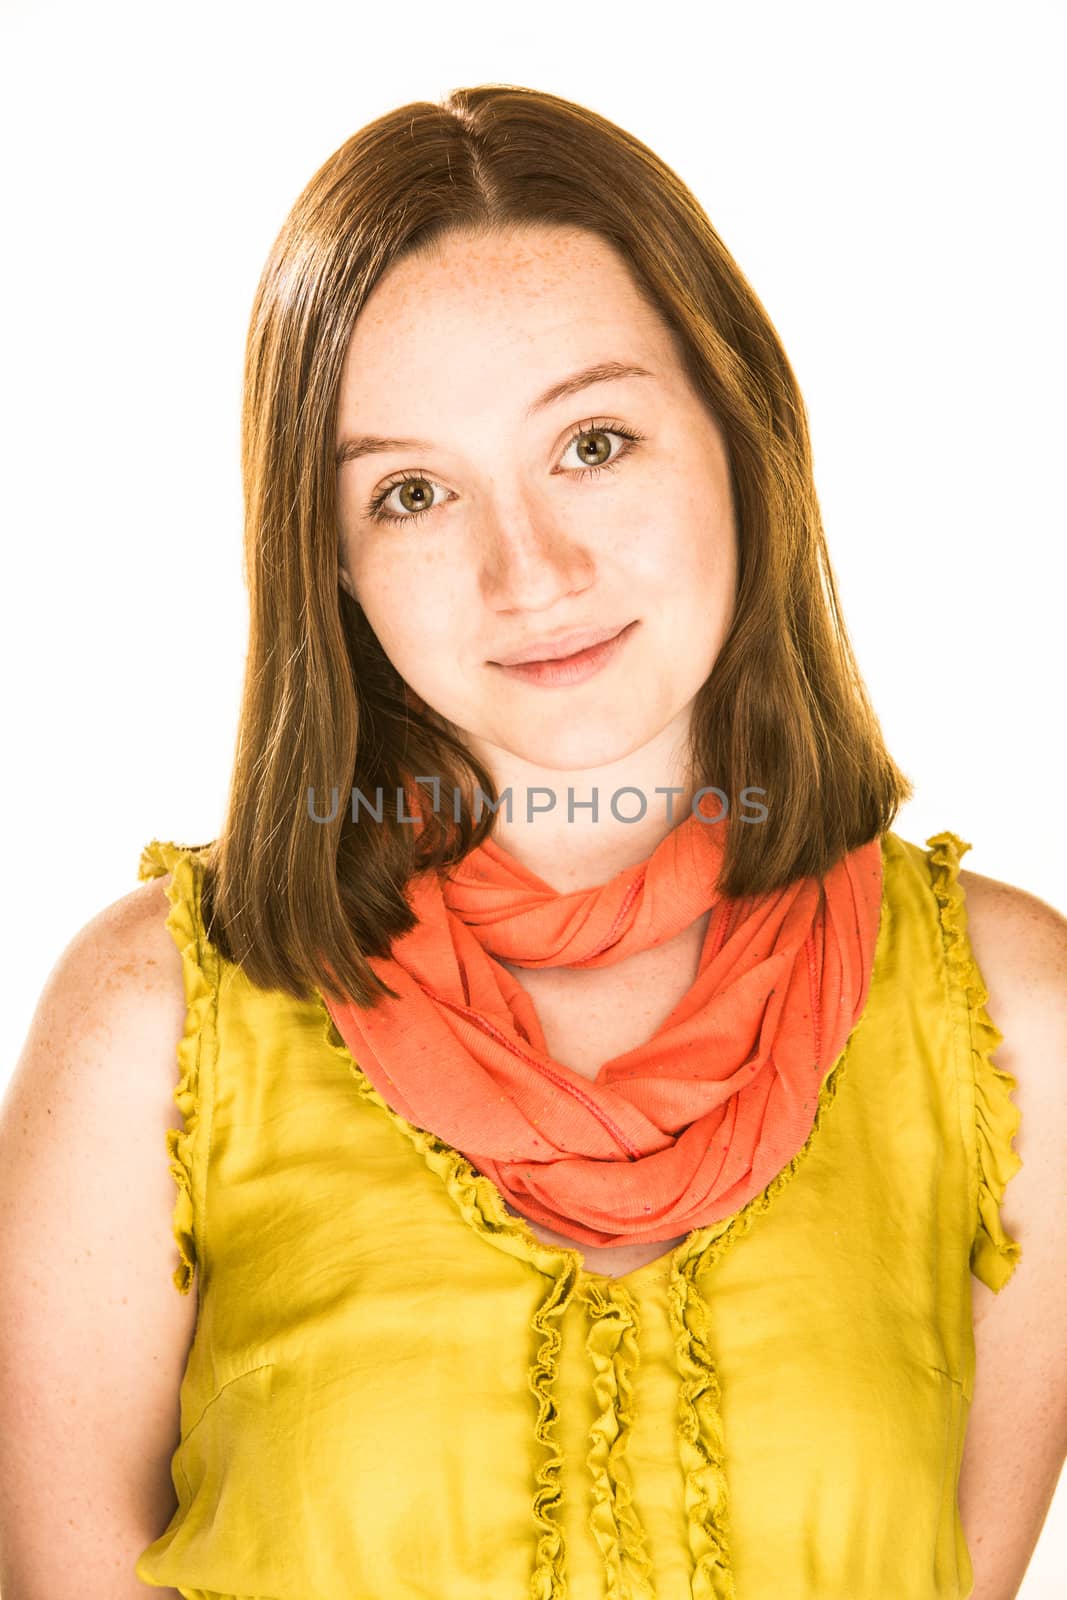 Pretty girl with a loving expression on white background